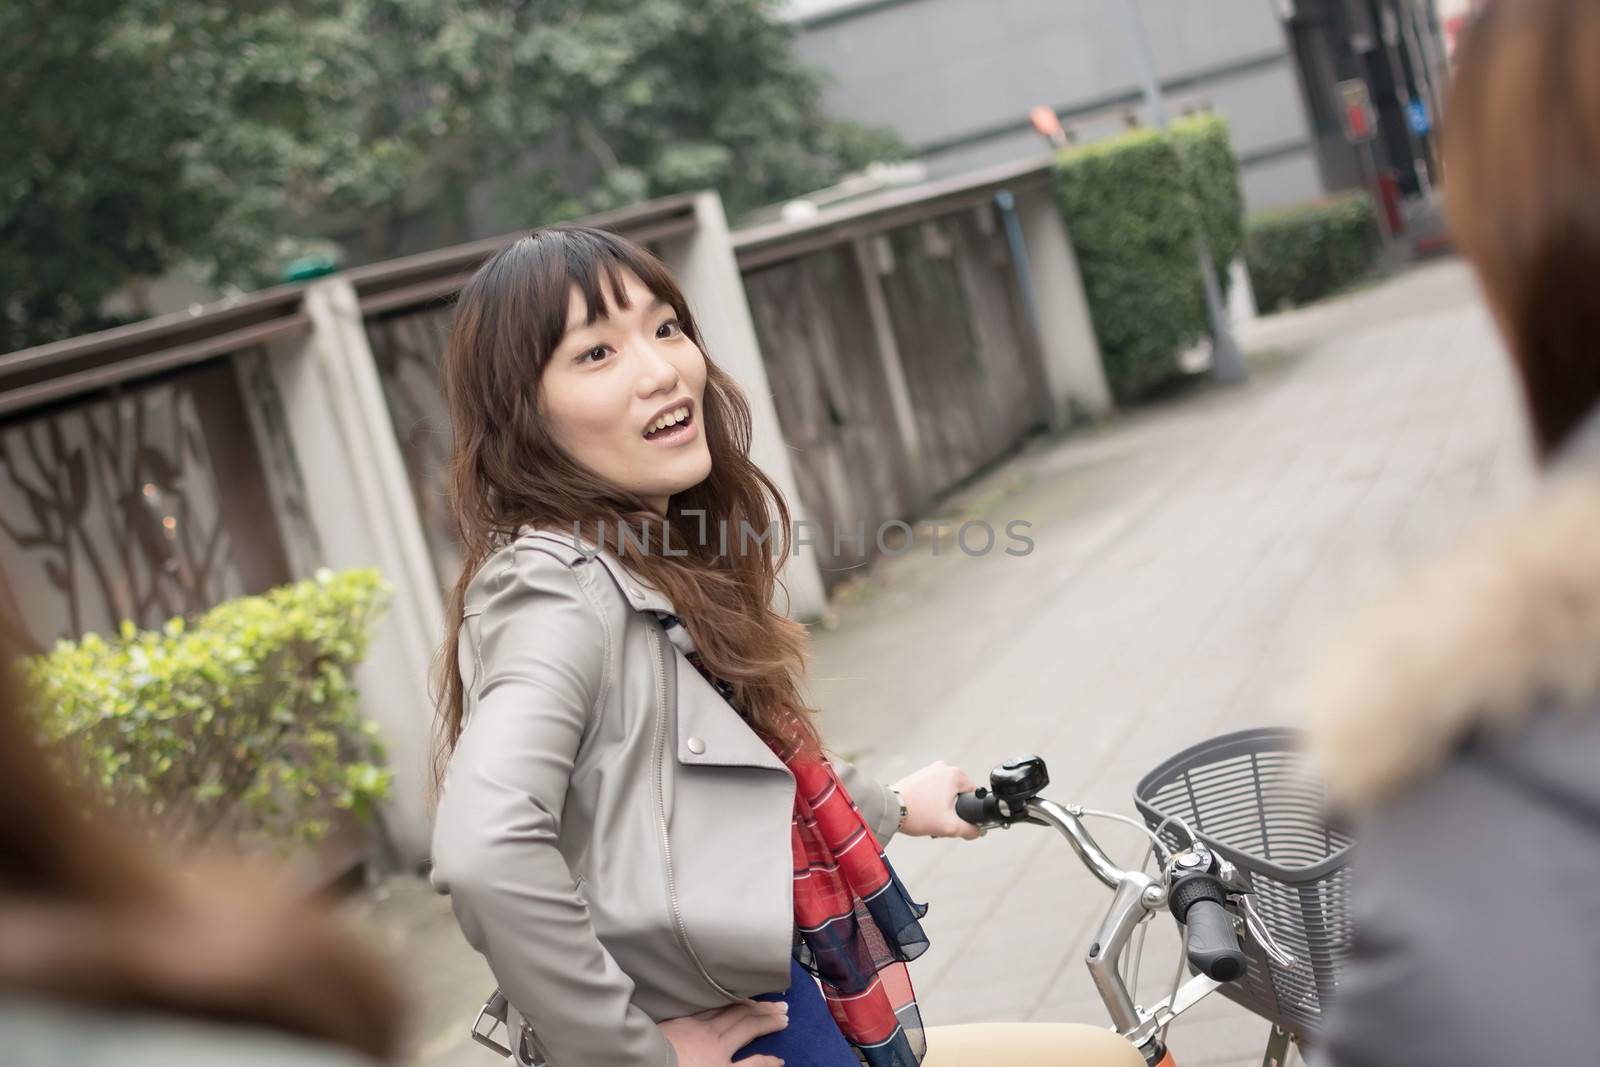 Young Asian woman riding bicycle with friends in city, Taipei, Taiwan.